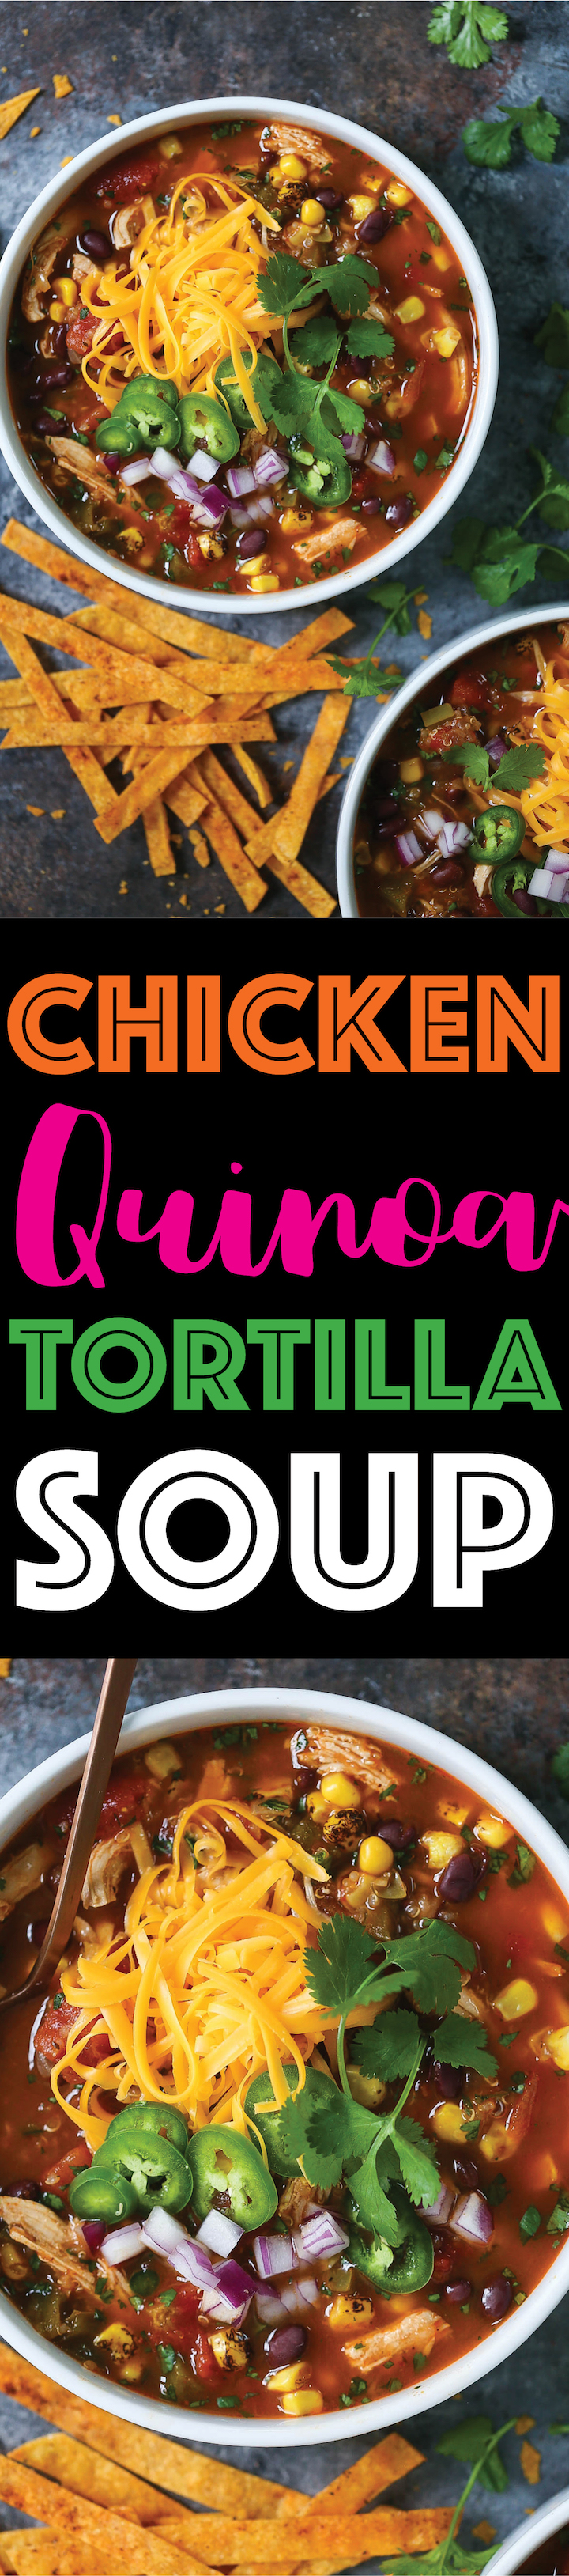 Chicken and Quinoa Tortilla Soup - Everyone's FAVORITE chicken tortilla soup, except made healthier and heartier with added quinoa. This cozy soup is full of fiber and protein to keep you full all day long! You can also add the easiest homemade crispy BAKED tortilla strips!